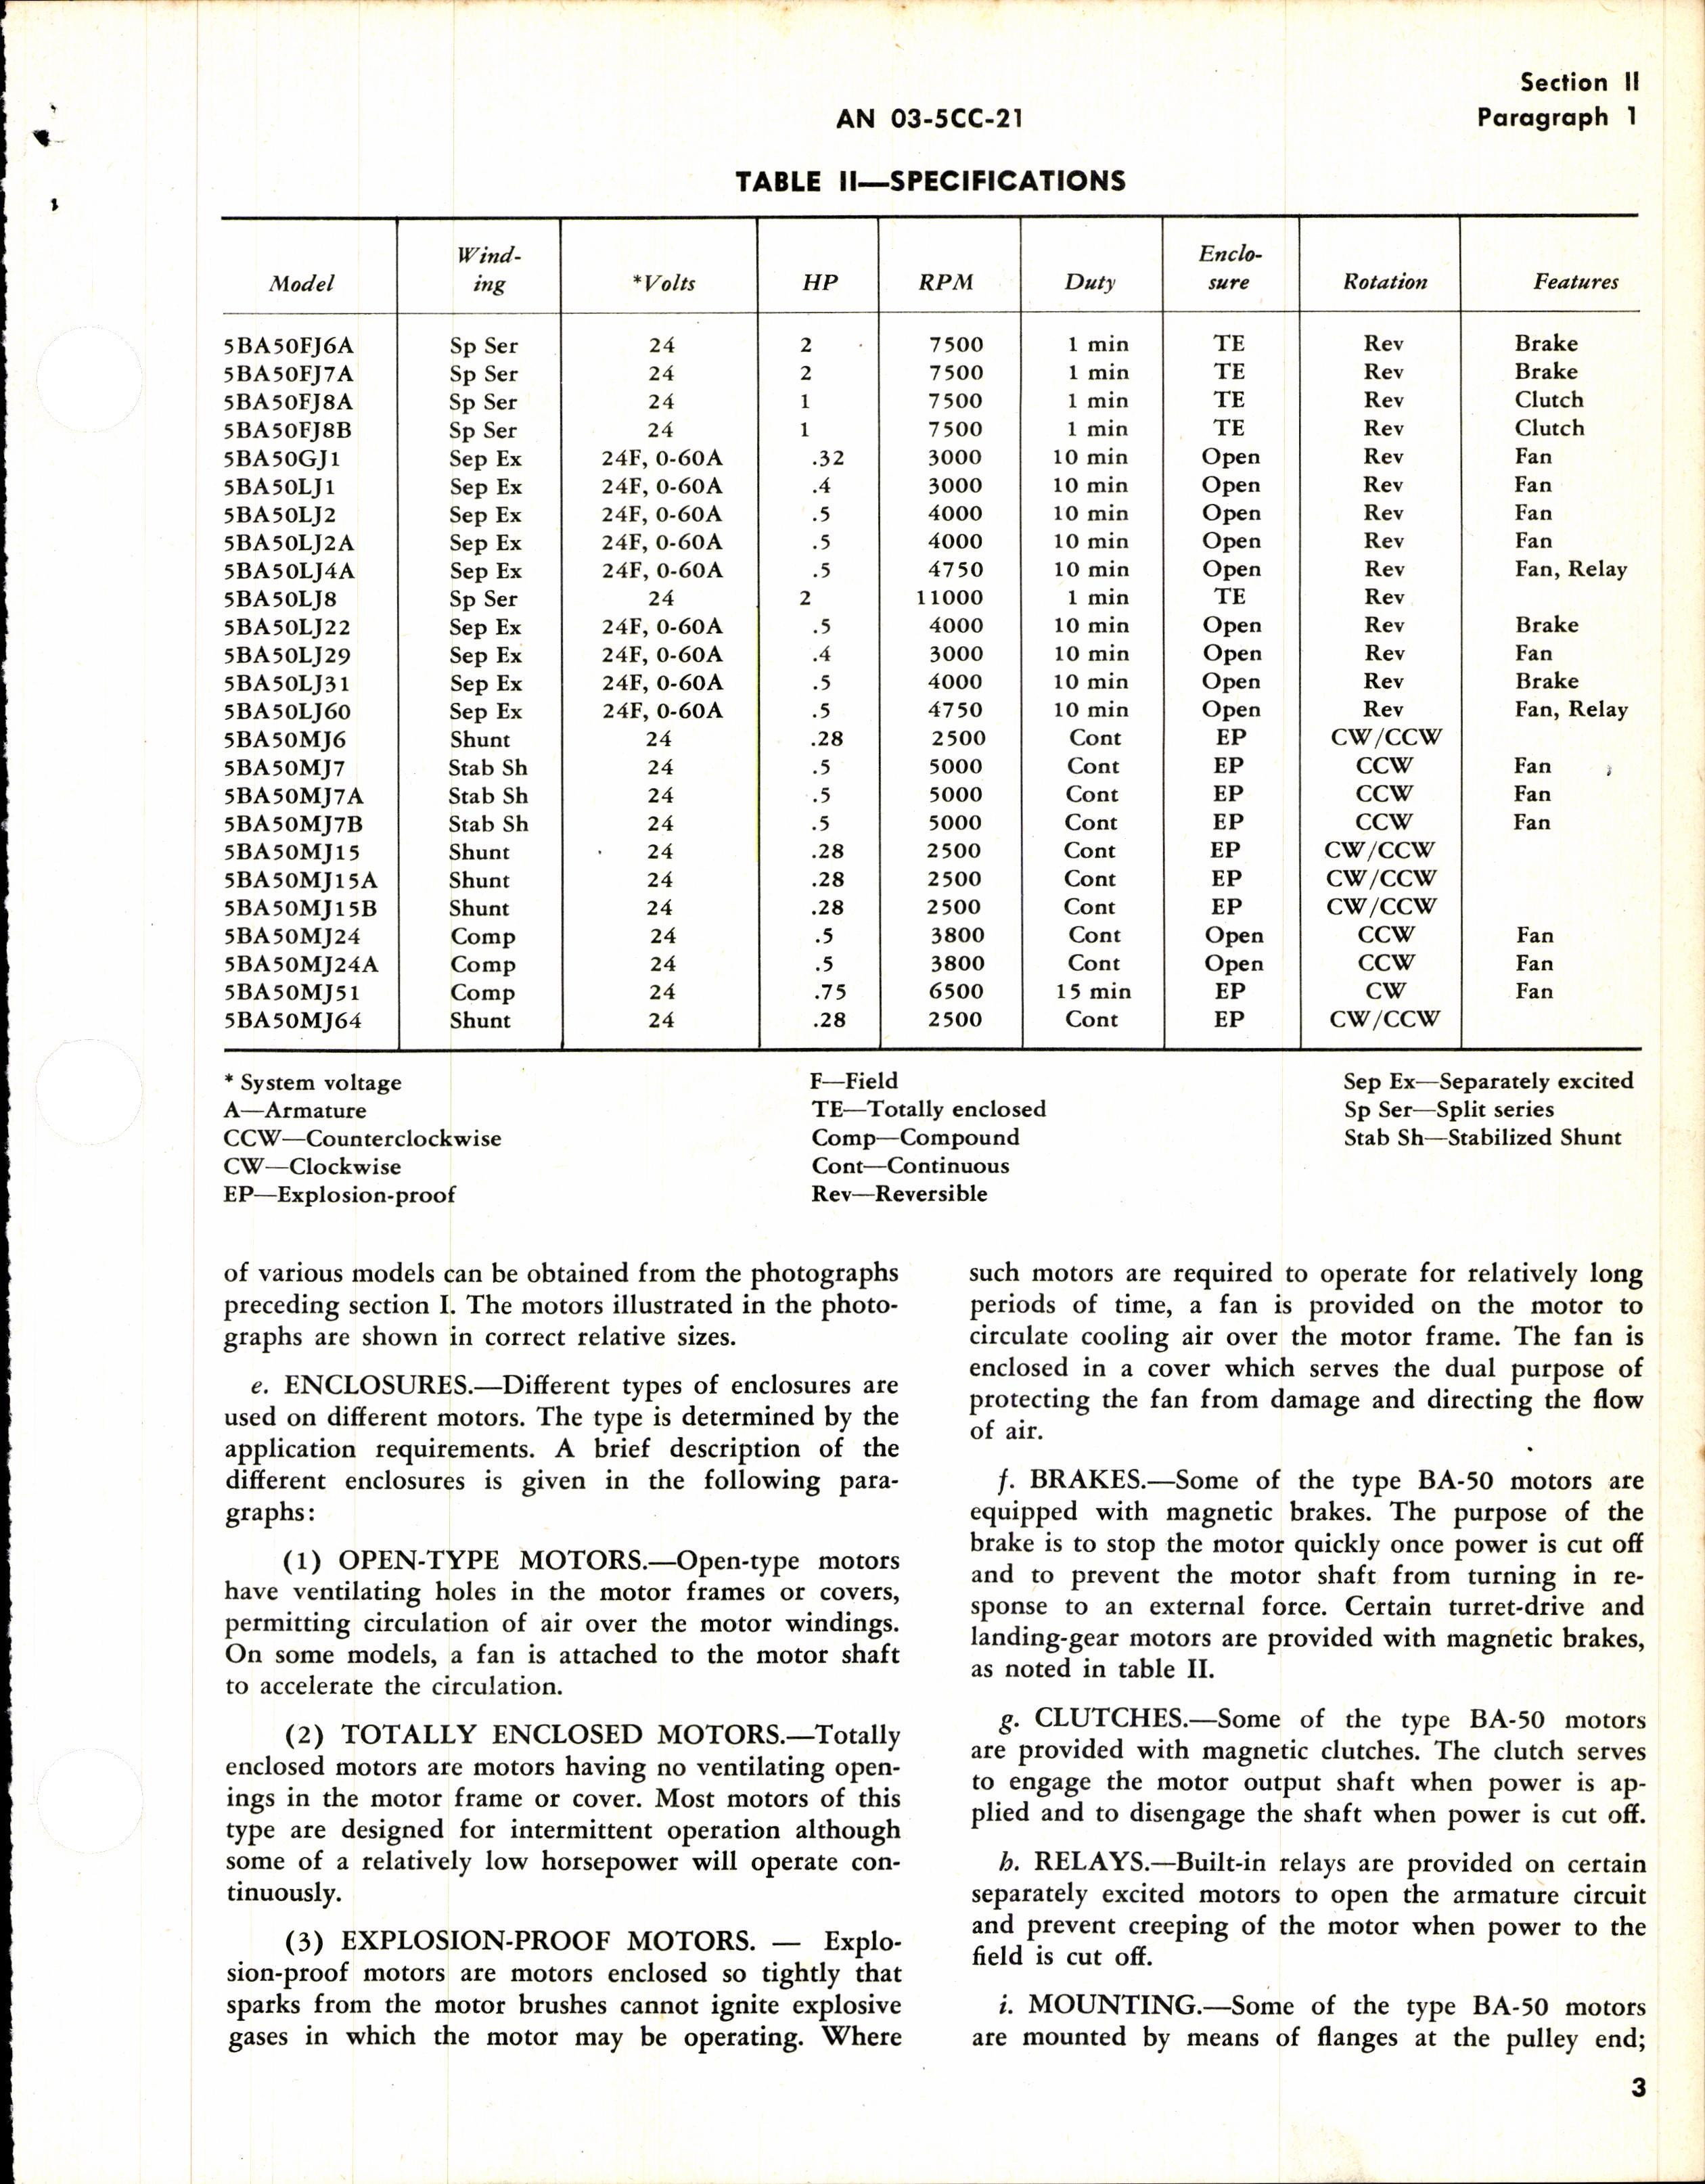 Sample page 5 from AirCorps Library document: Handbook of Instructions with Parts Catalog for Model 5BA50 Series Electric Motors